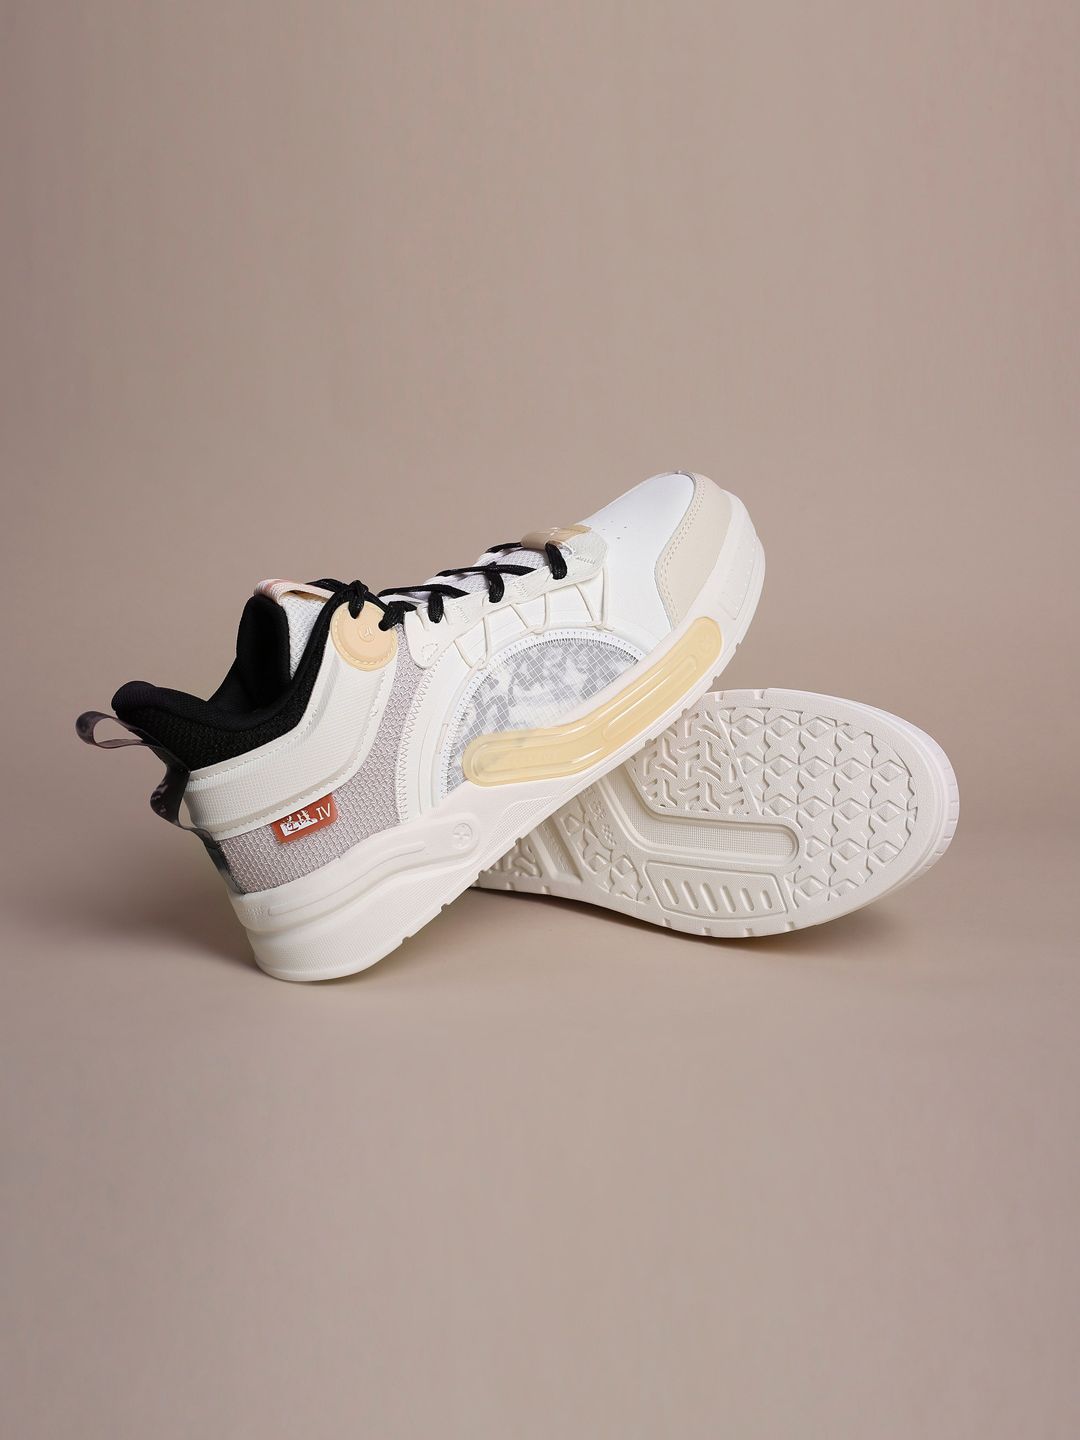 Xtep Women White Skateboarding Non-Marking Shoes Price in India